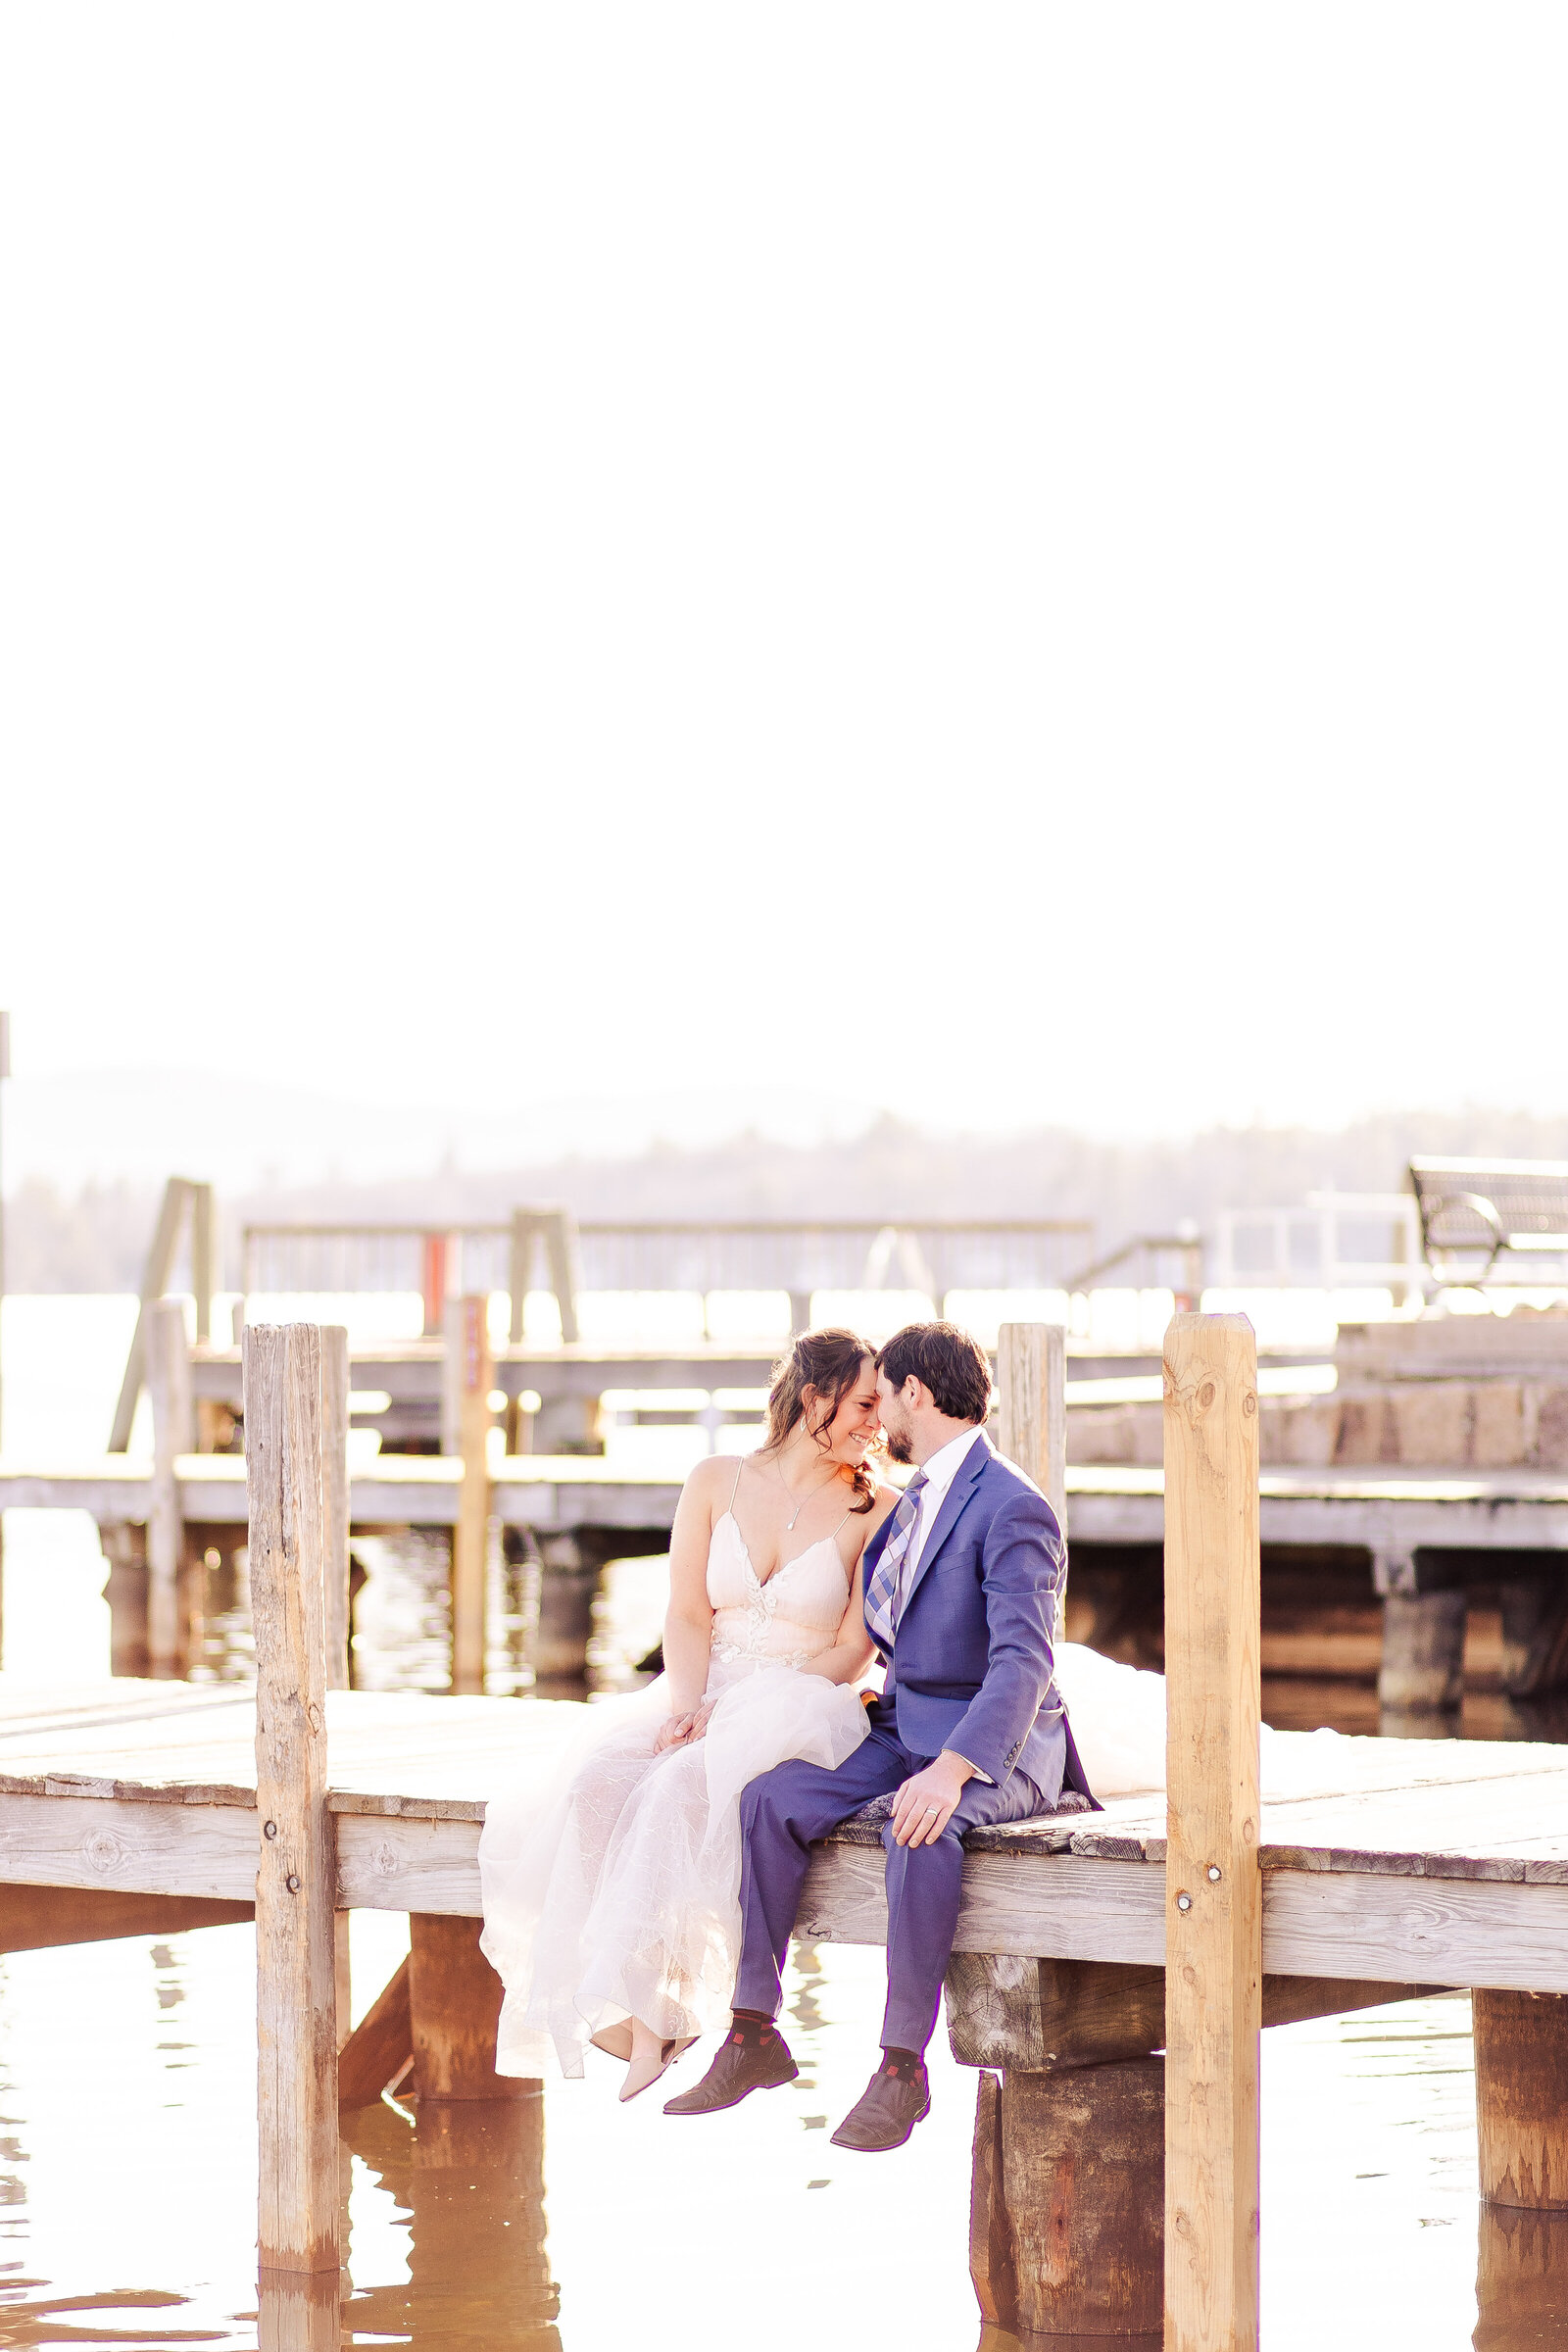 A Dockside Couple's Session in Wolfeboro, New Hampshire (69 of 81)